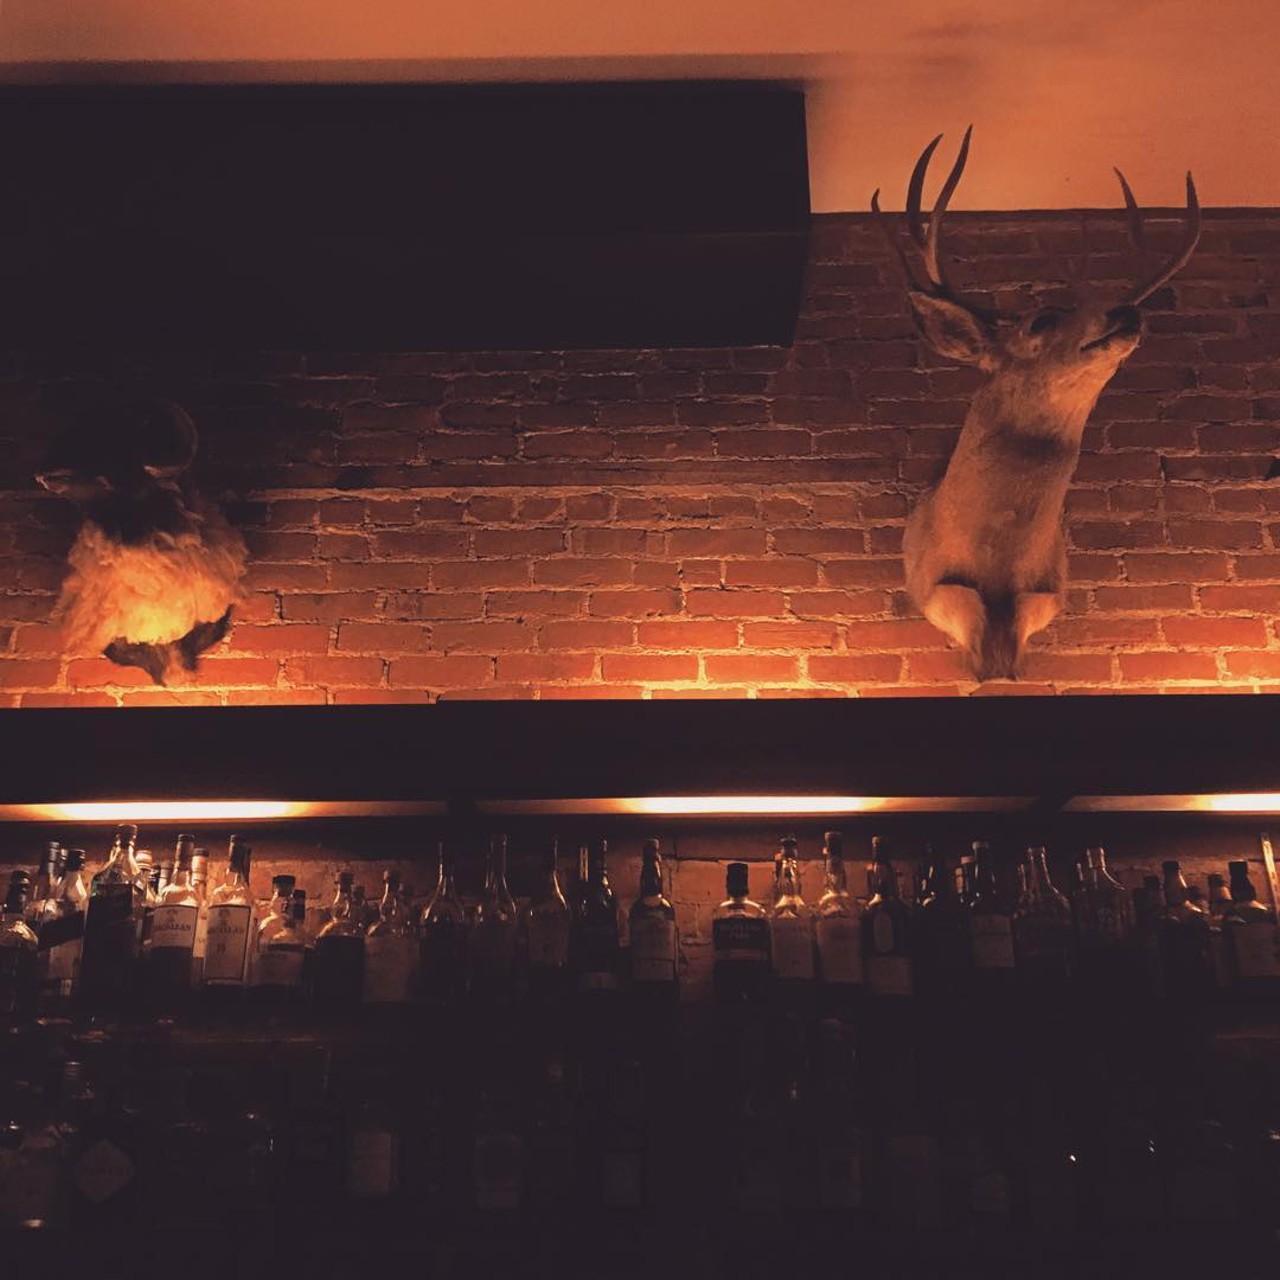 Sugar House
2130 Michigan Ave, Detroit
(313)-962-0123
Who doesn&#146;t love a classy cocktail? With delicious drinks that will make you want to stay for hours, and friendly bartenders, this bar is one for the list. 
Photo via IG user @aarondka